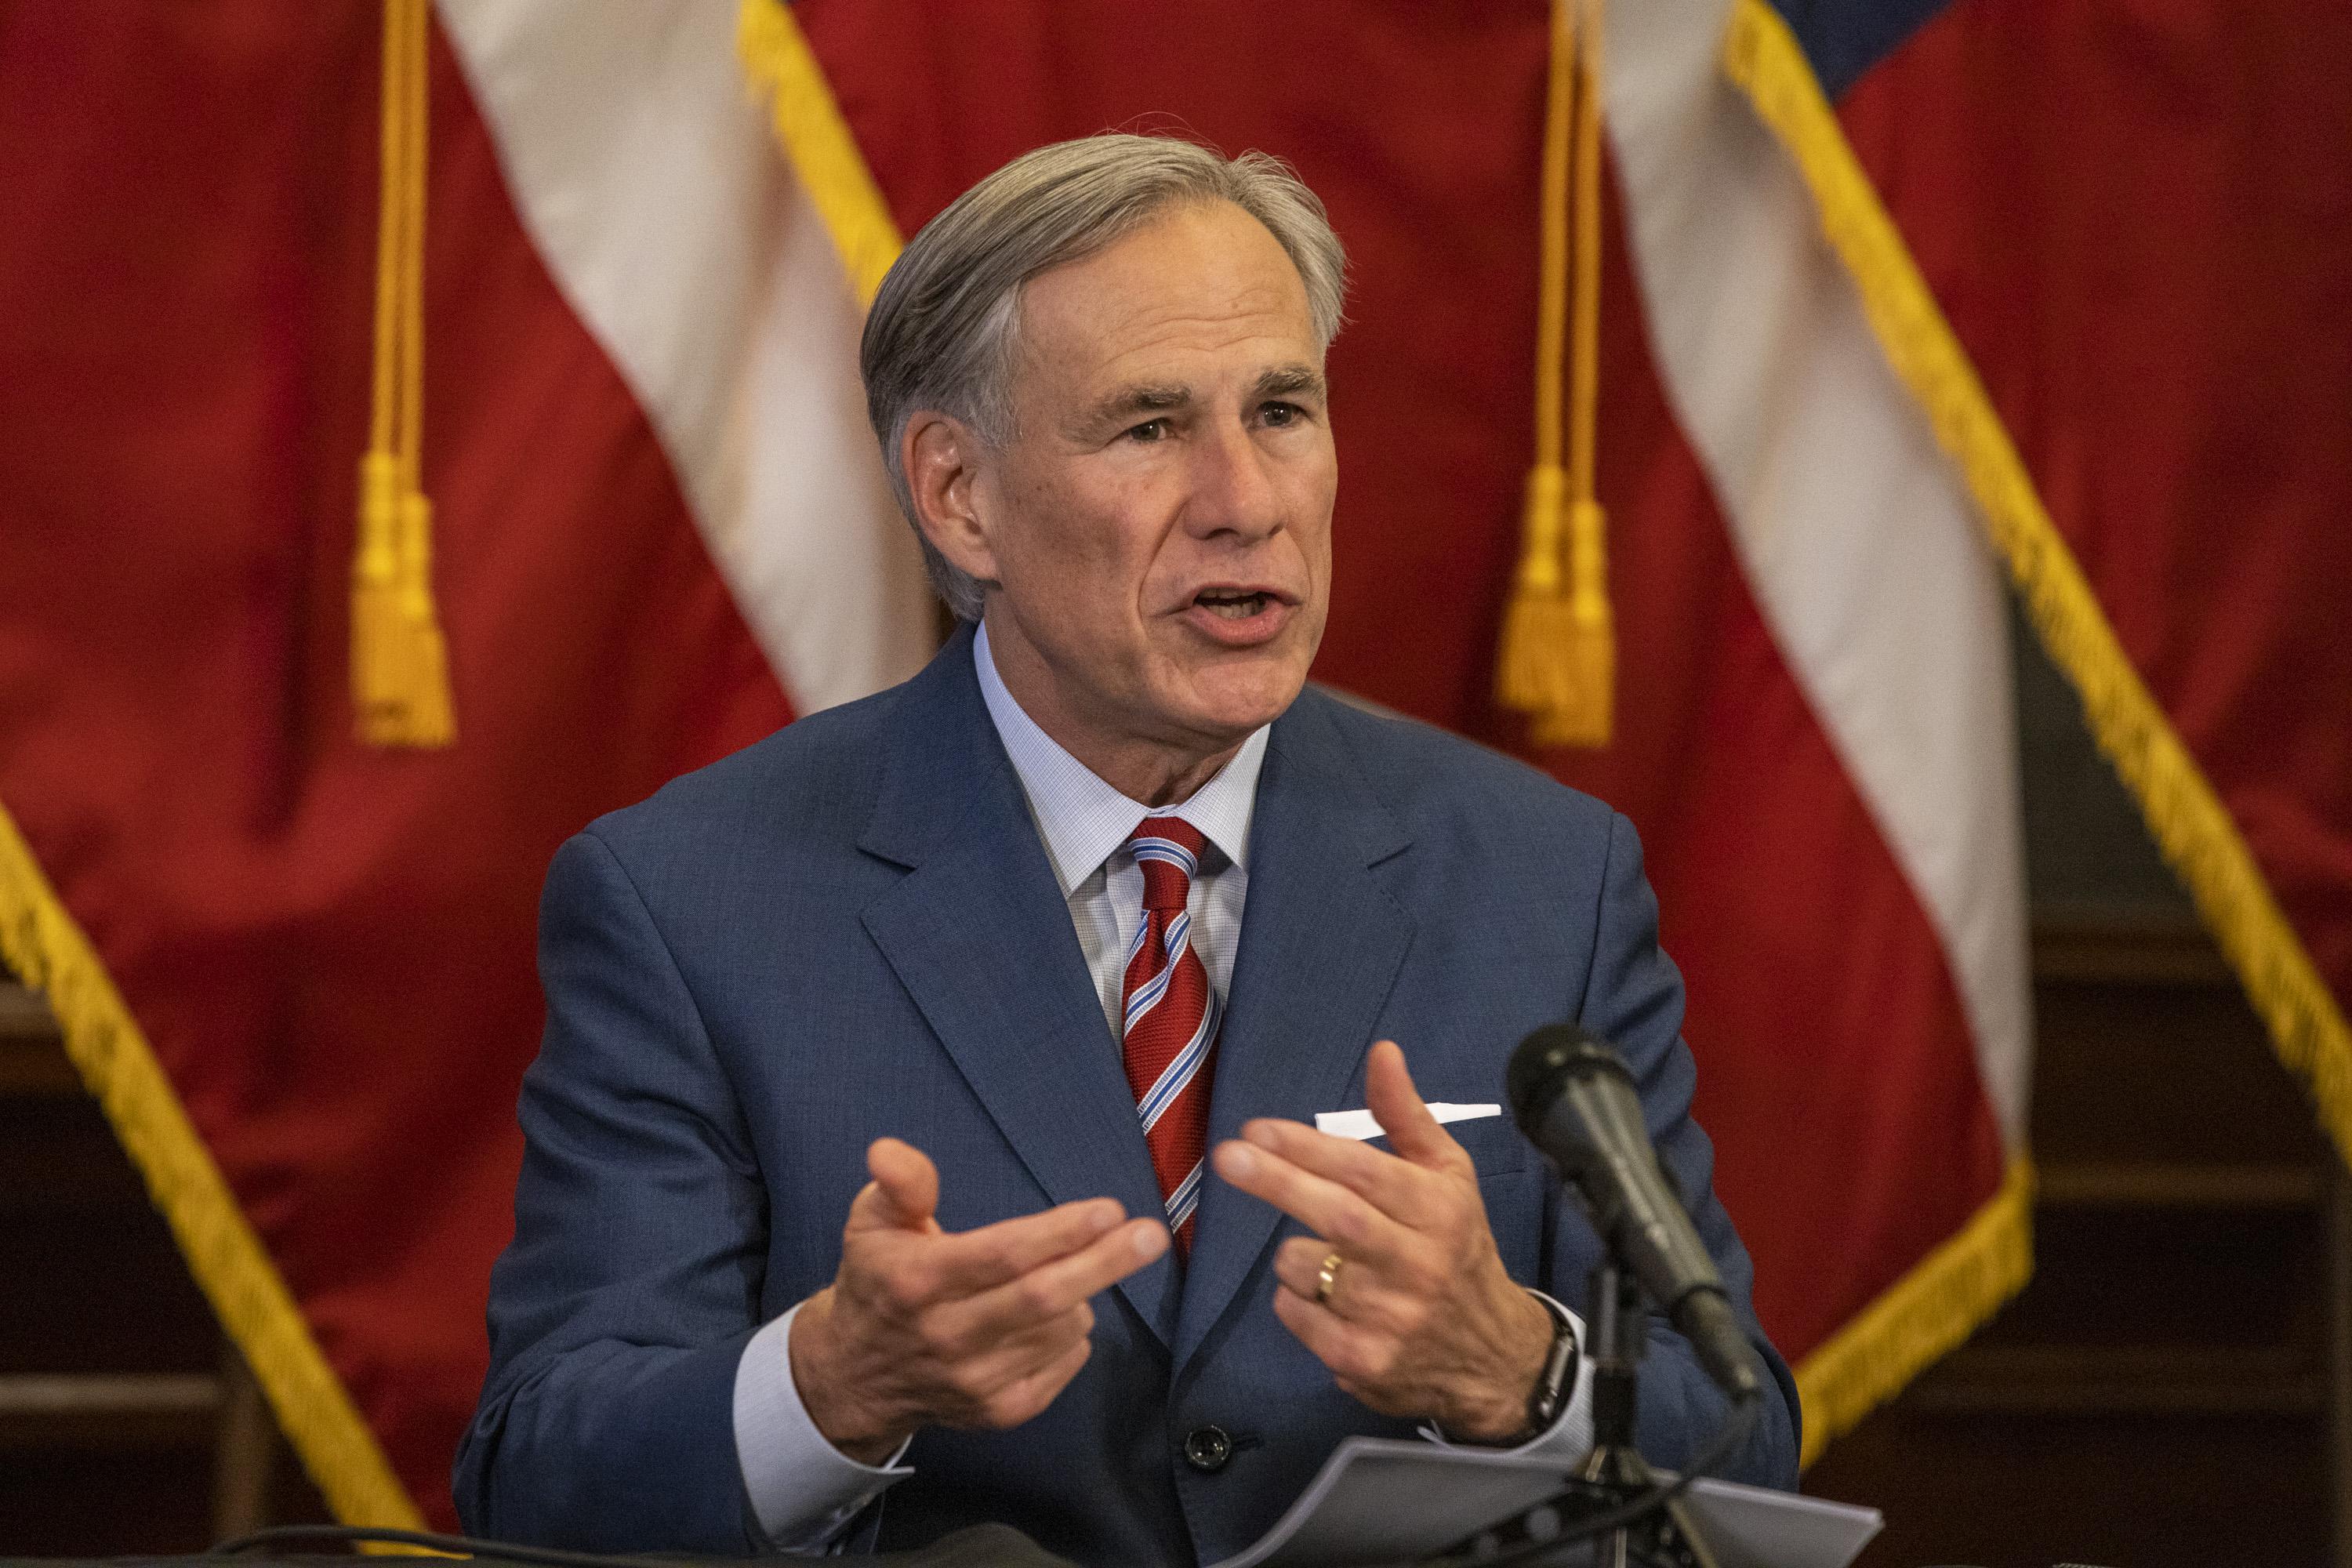 Texas Gov. Greg Abbott speaks in front of American flags, gesturing with his hands.